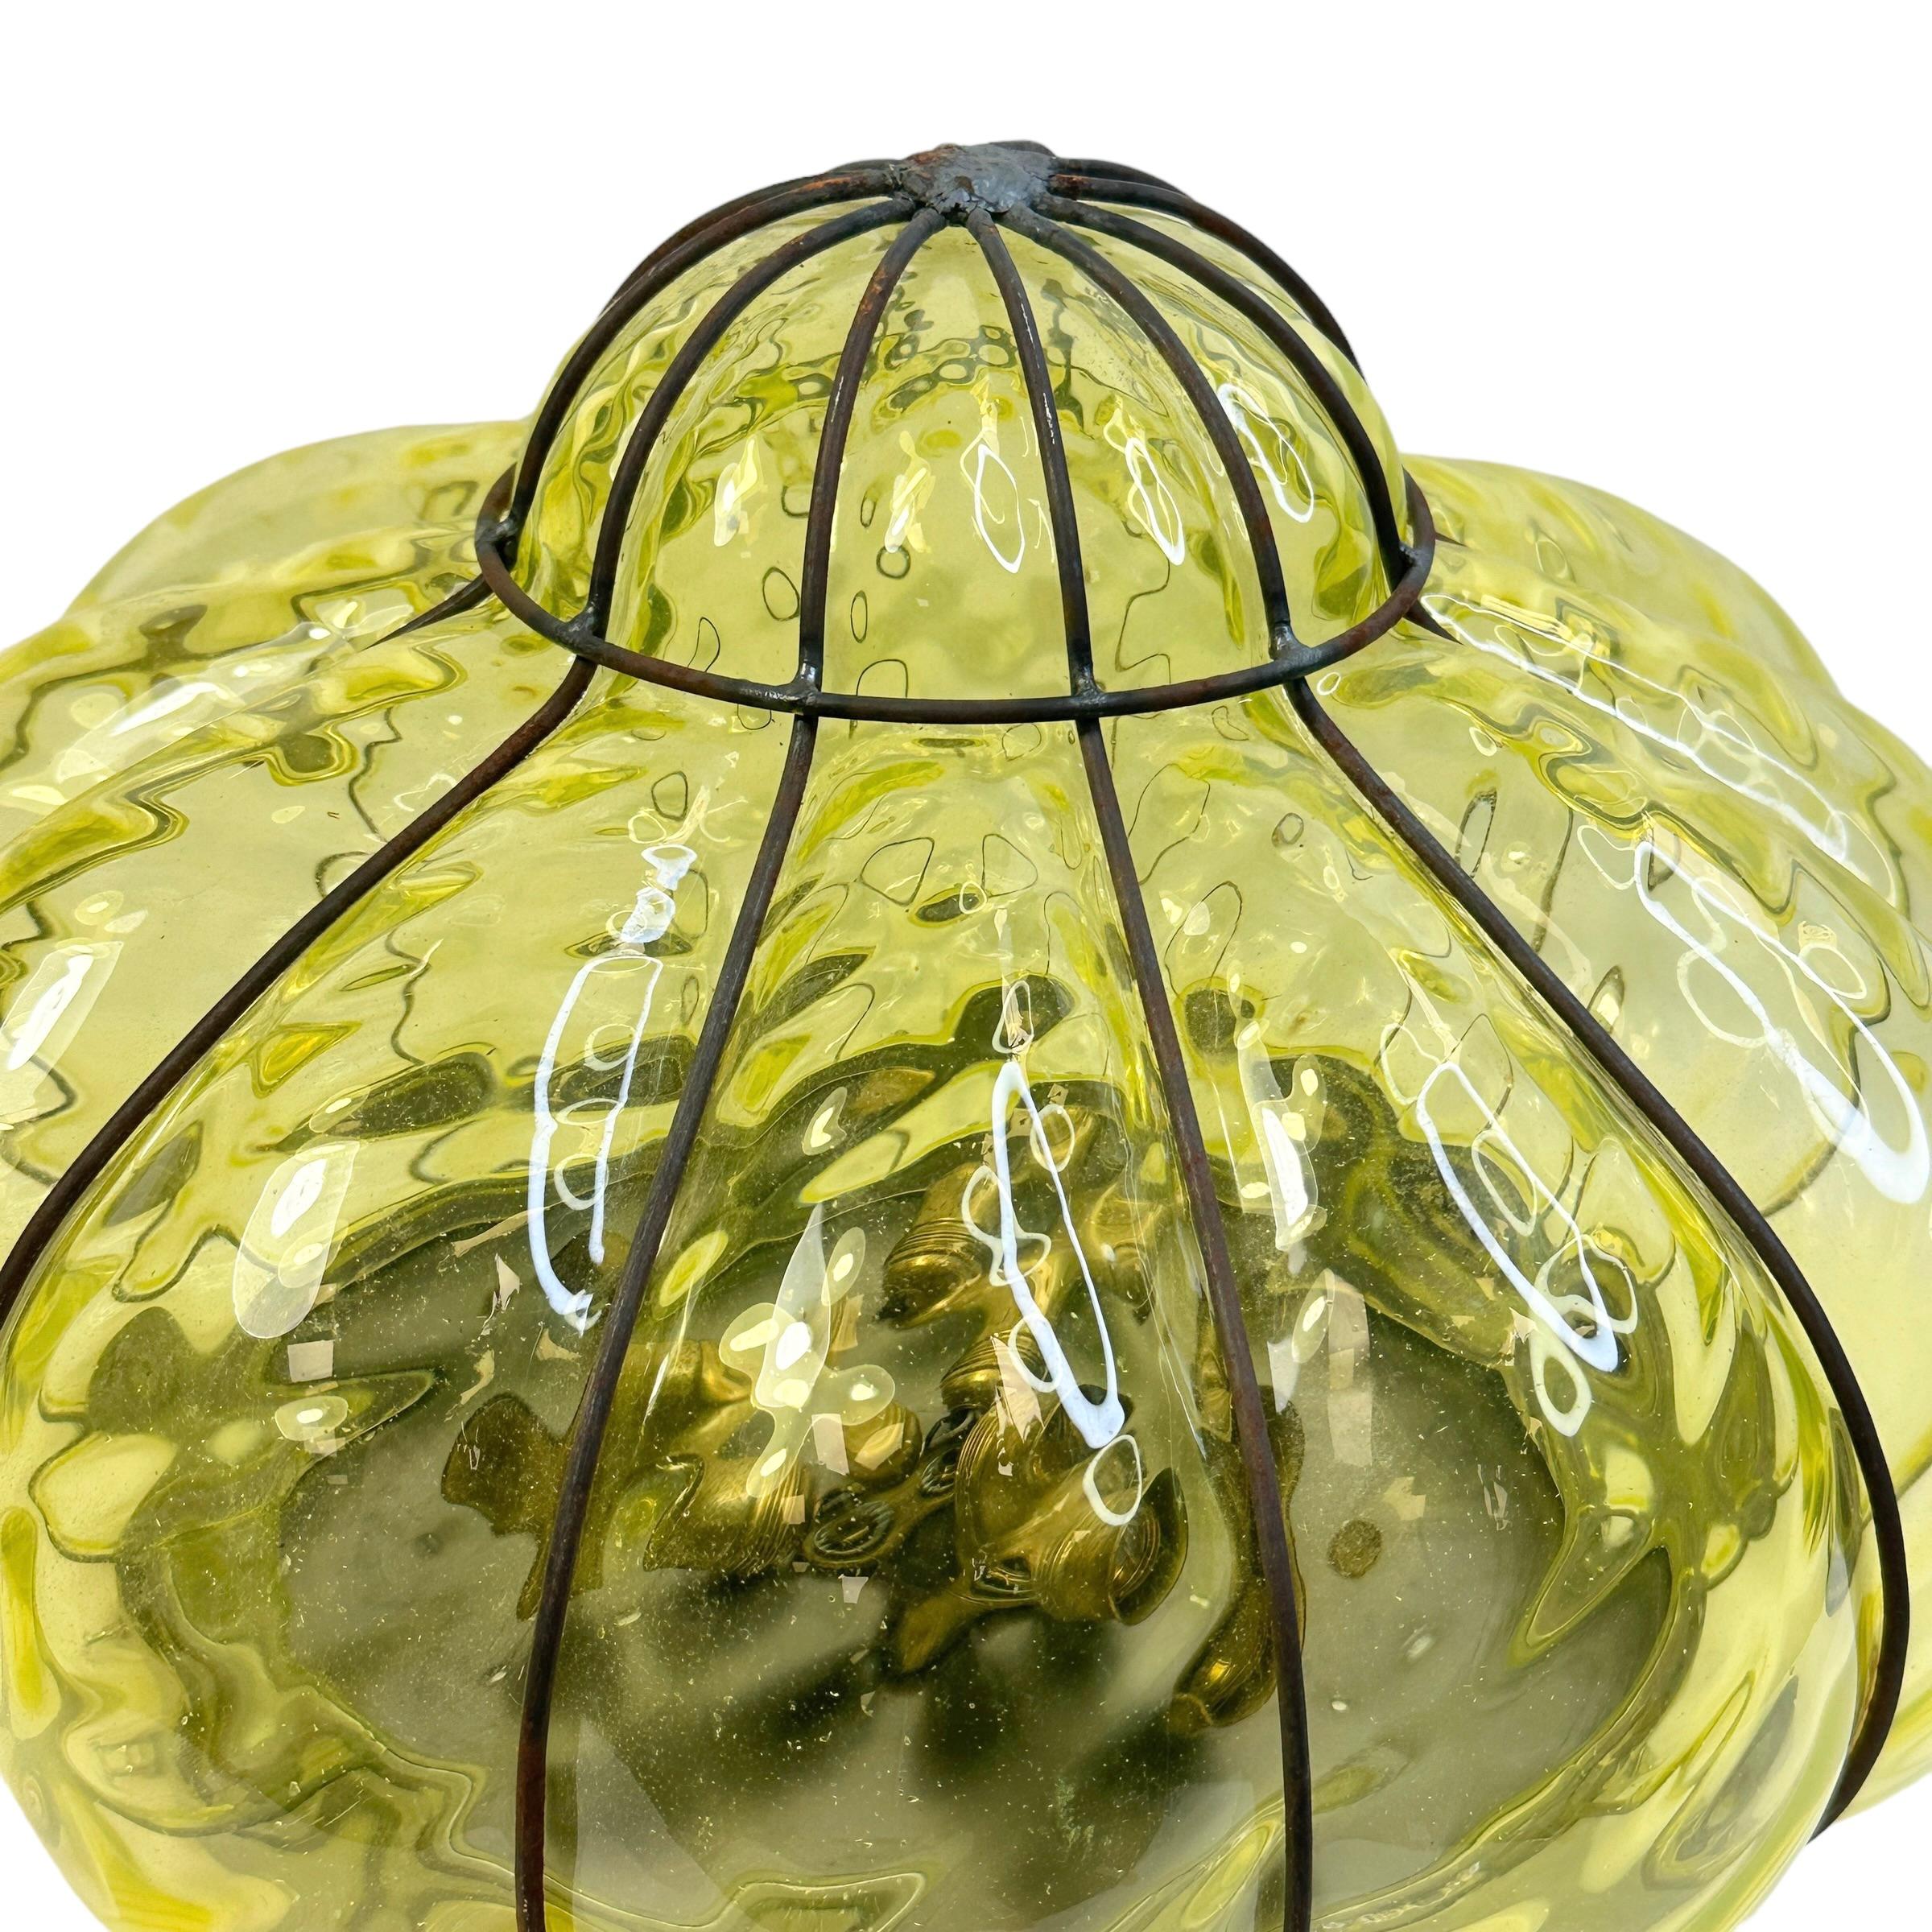 Mid-20th Century Sultano Onion Dome Iron Caged Venetian Glass Flush Mount or Sconce, Italy 1950s For Sale